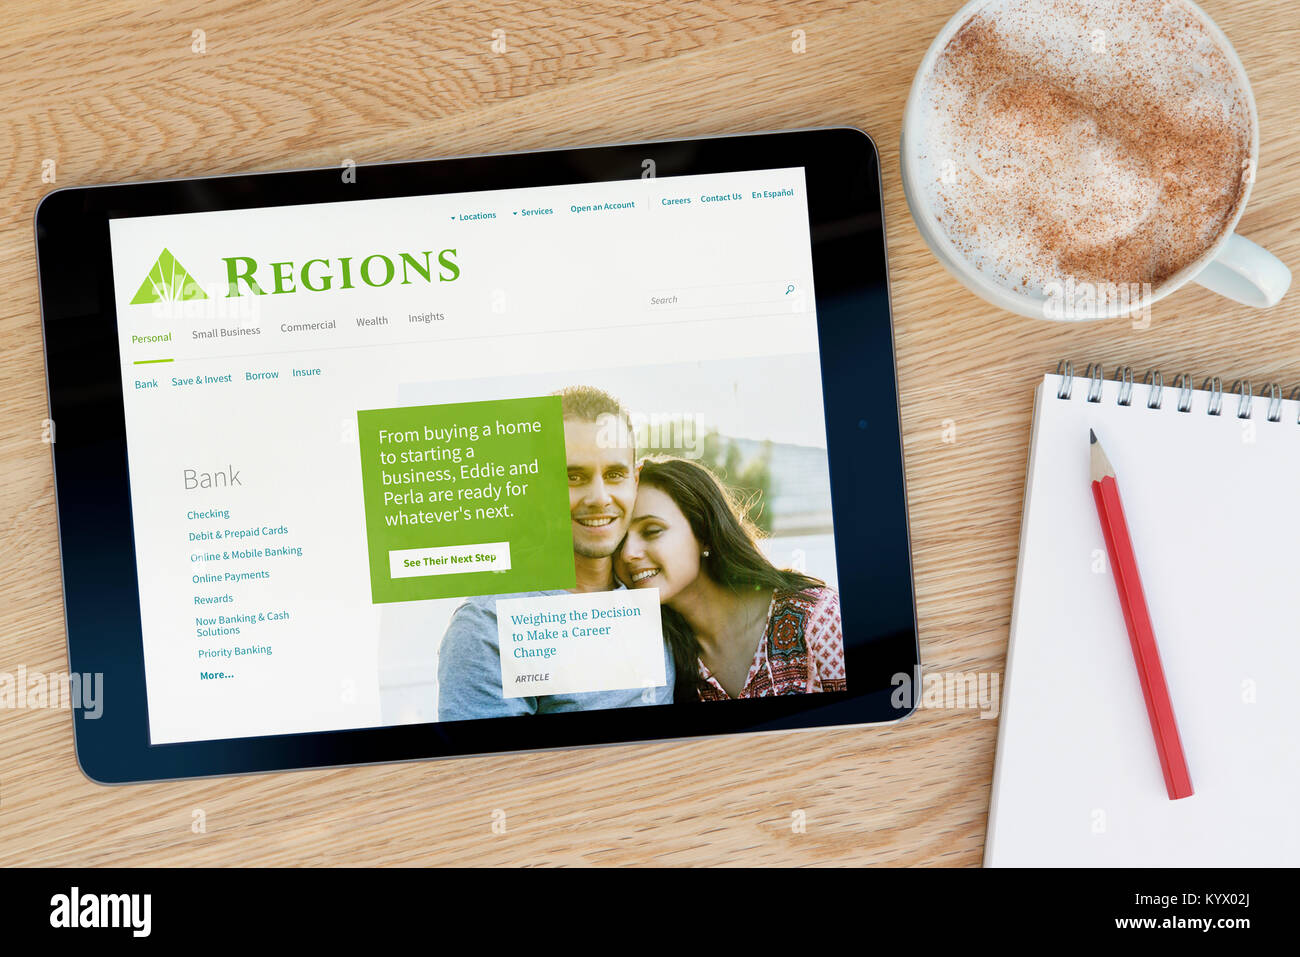 The Regions Financial Corporation website on an iPad tablet, on a wooden table beside a notepad, pencil and cup of coffee (Editorial only) Stock Photo